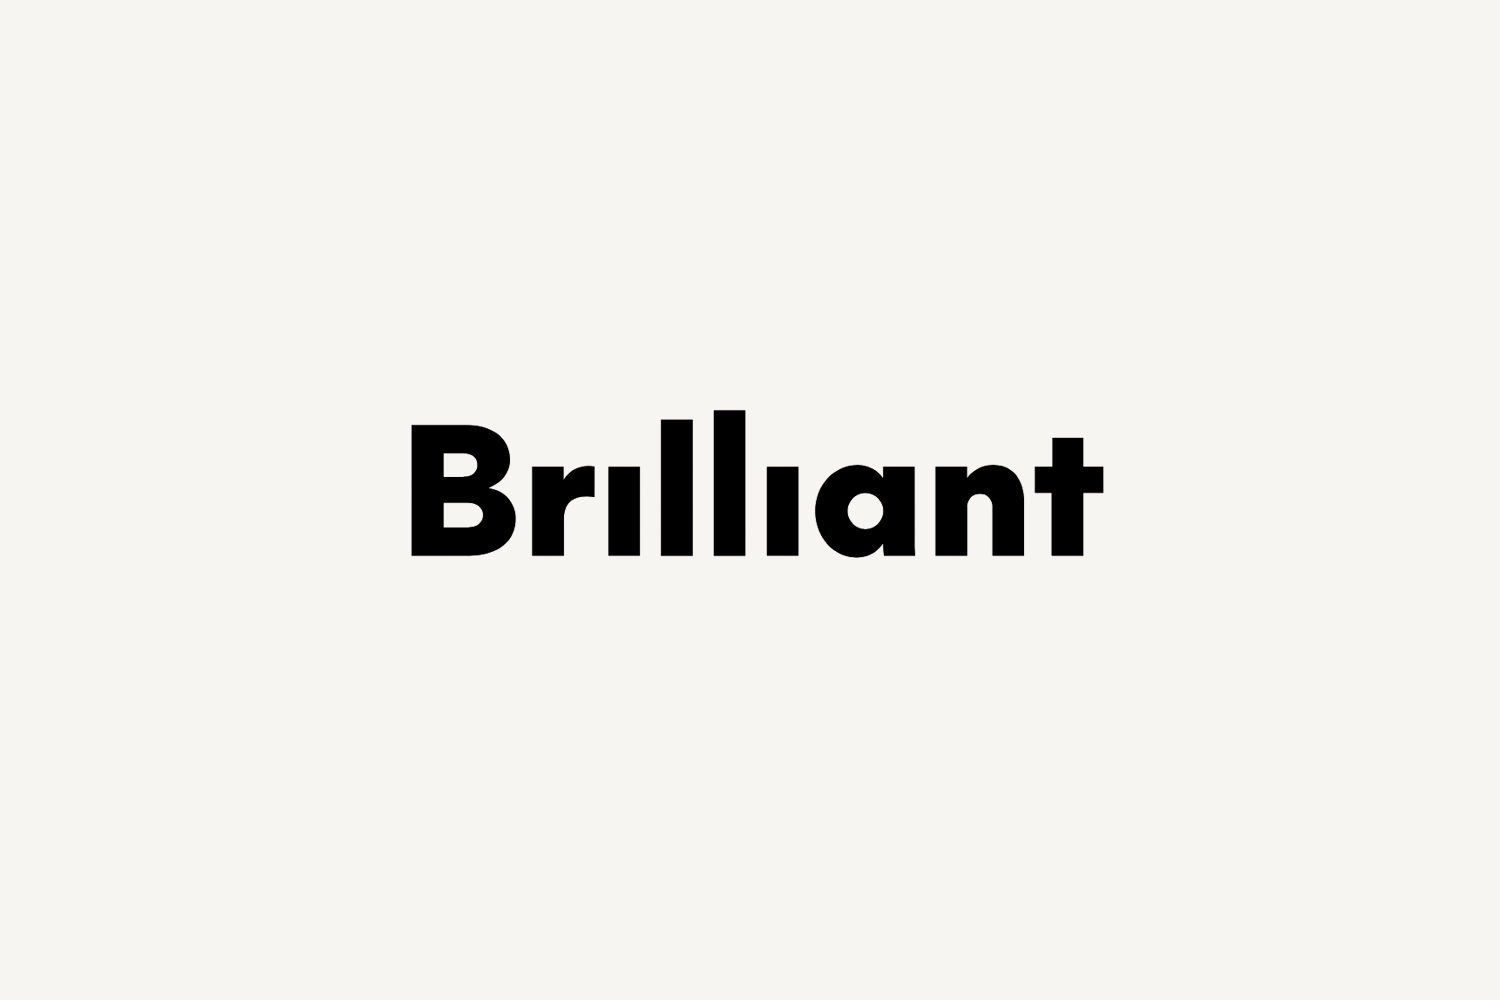 The Best Logo Designs of 2018 – Brilliant by The Studio, Sweden